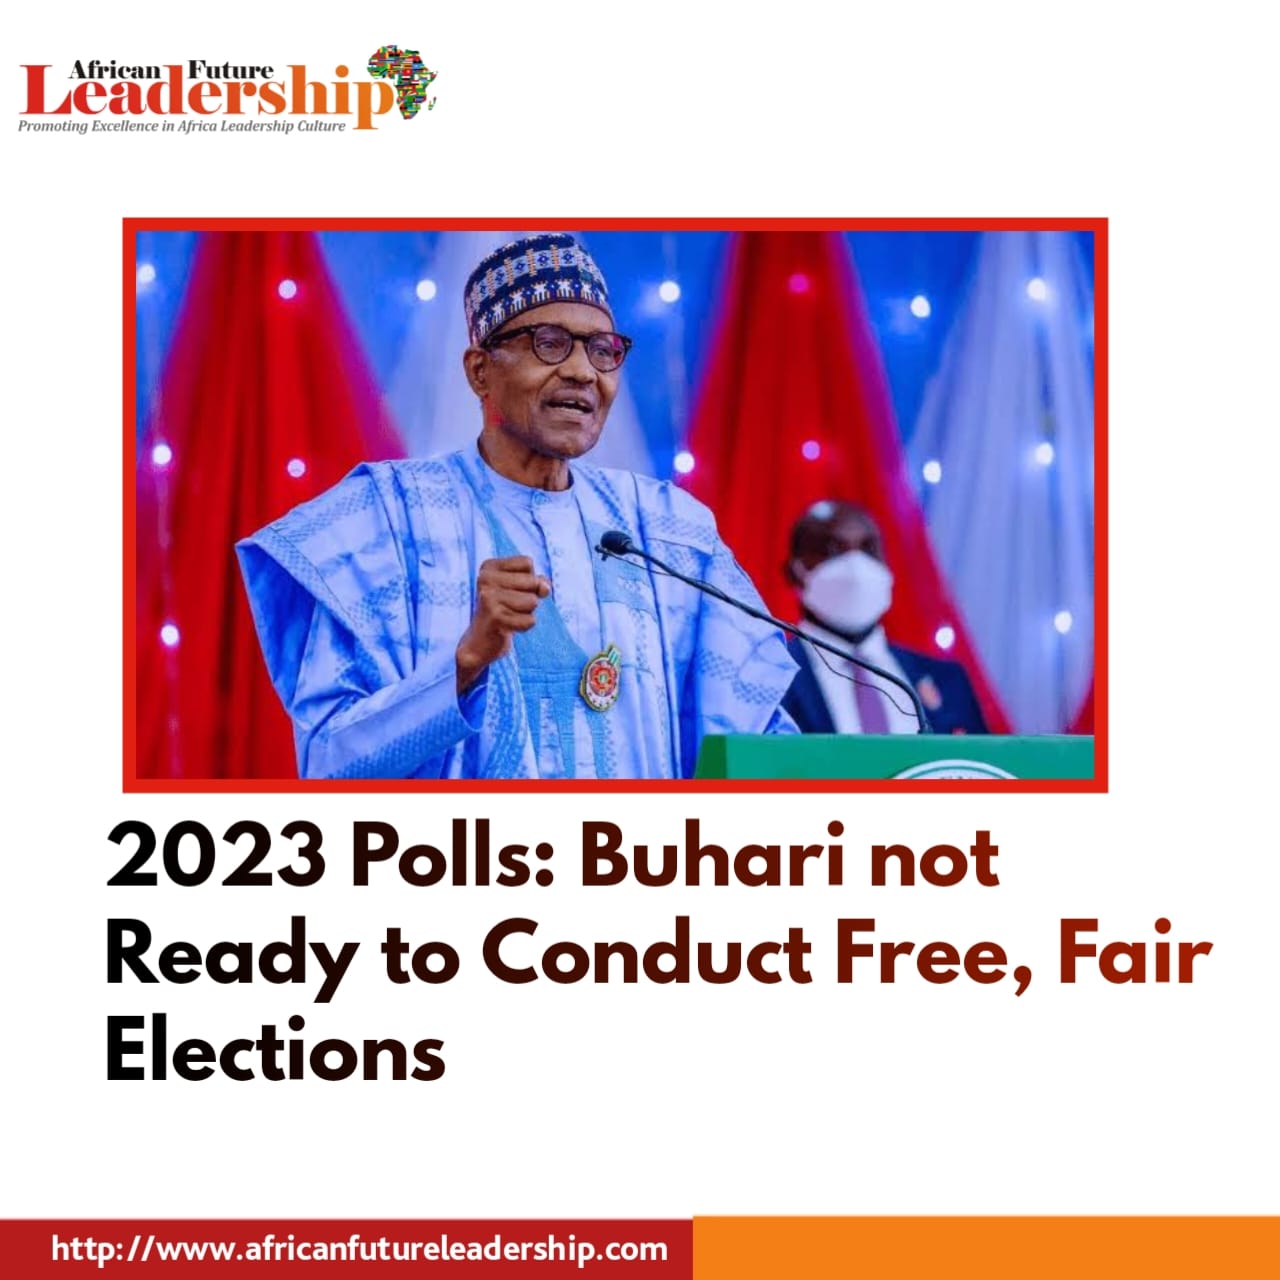 2023 Polls: Buhari not Ready to Conduct Free, Fair Elections